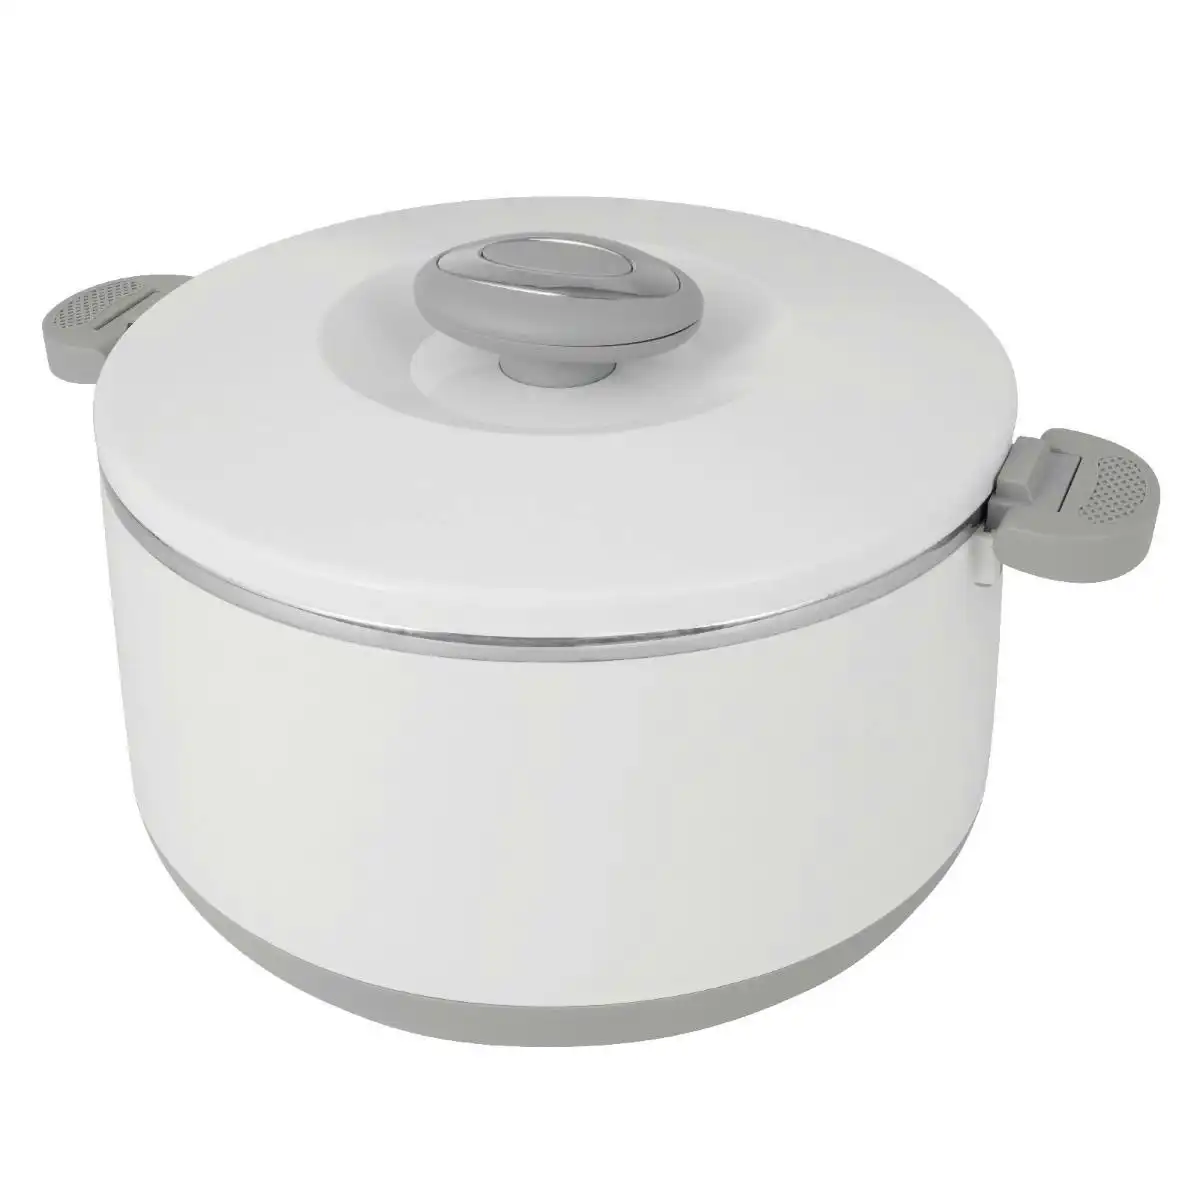 Pyrolux Pyrotherm Insulated Food Warmer